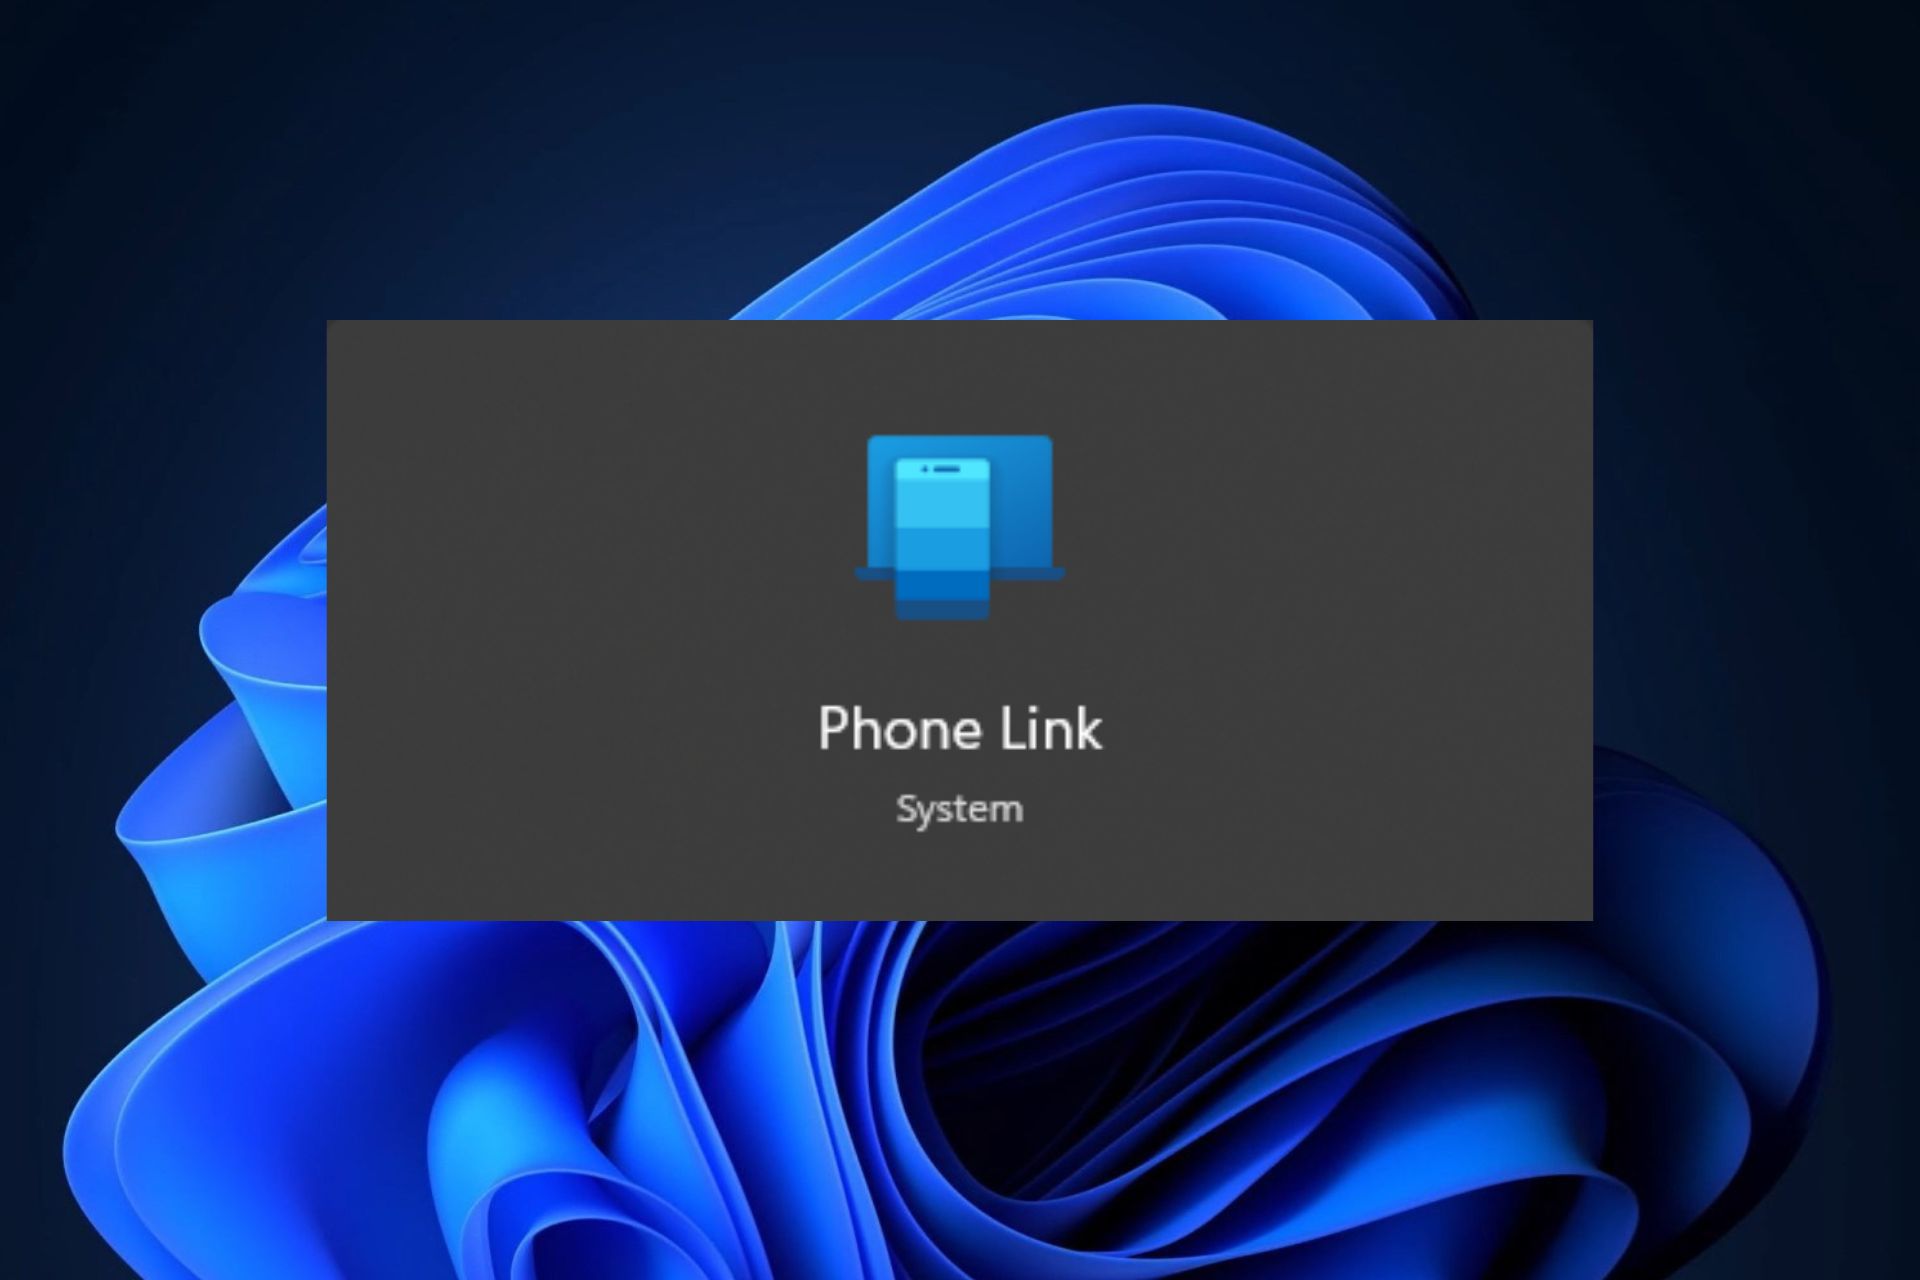 Phone Link might soon become a Companion app in Windows 11